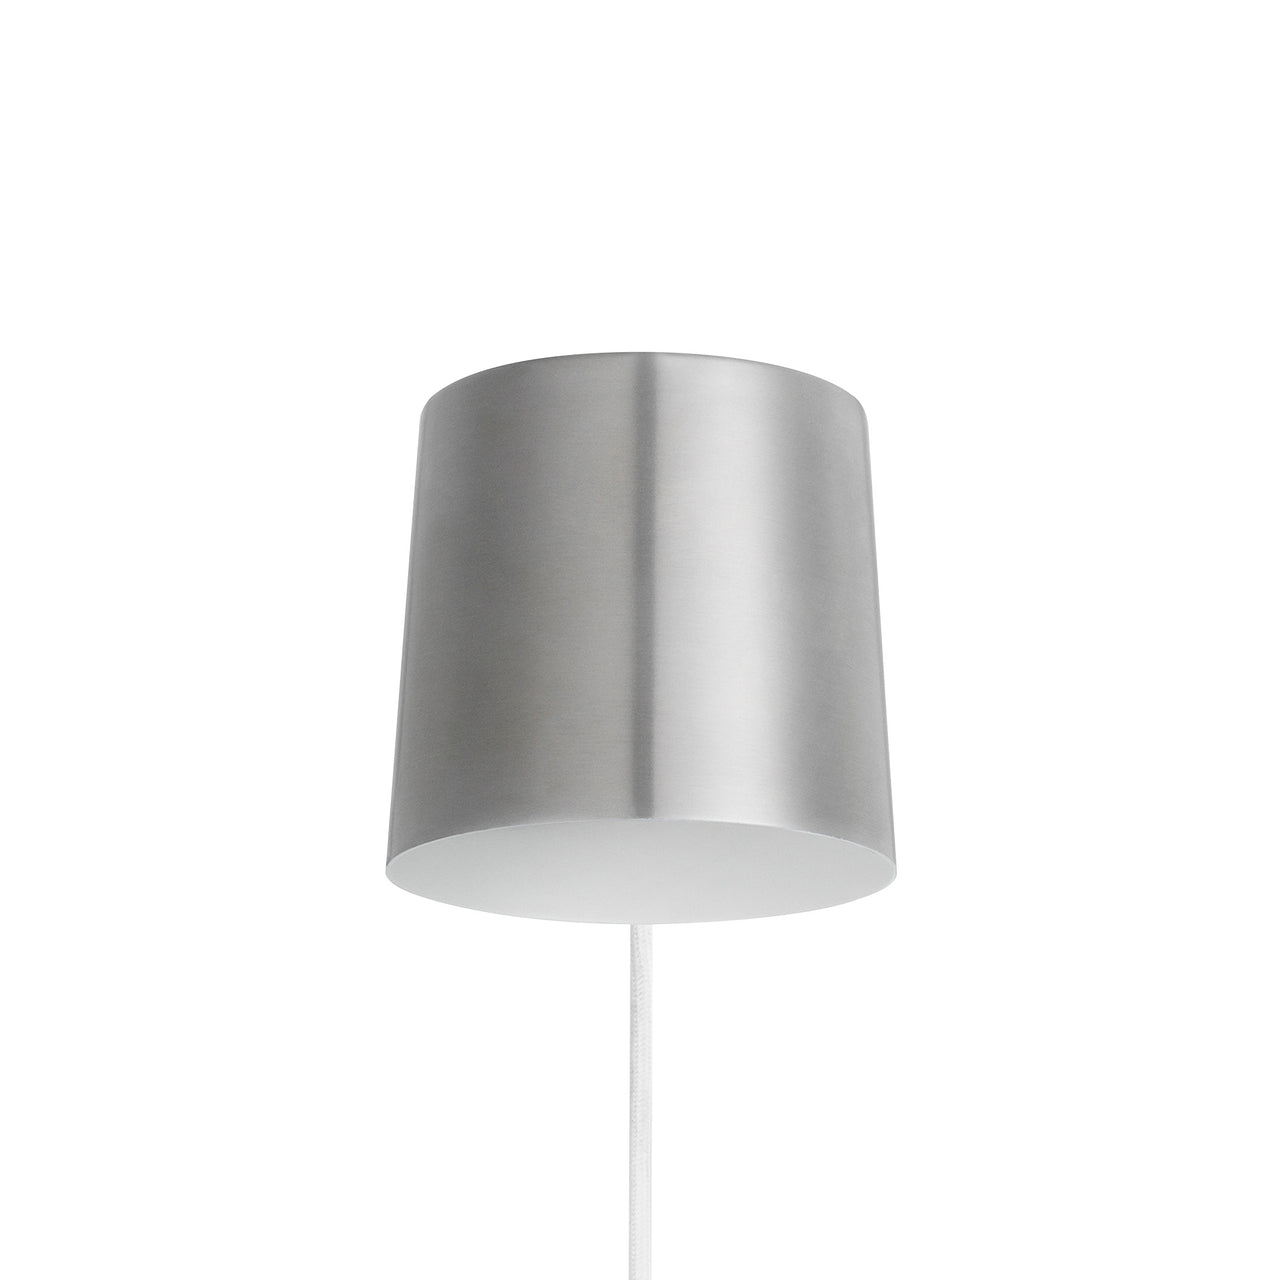 Rise Wall Lamp: Plug-in + Stainless Steel